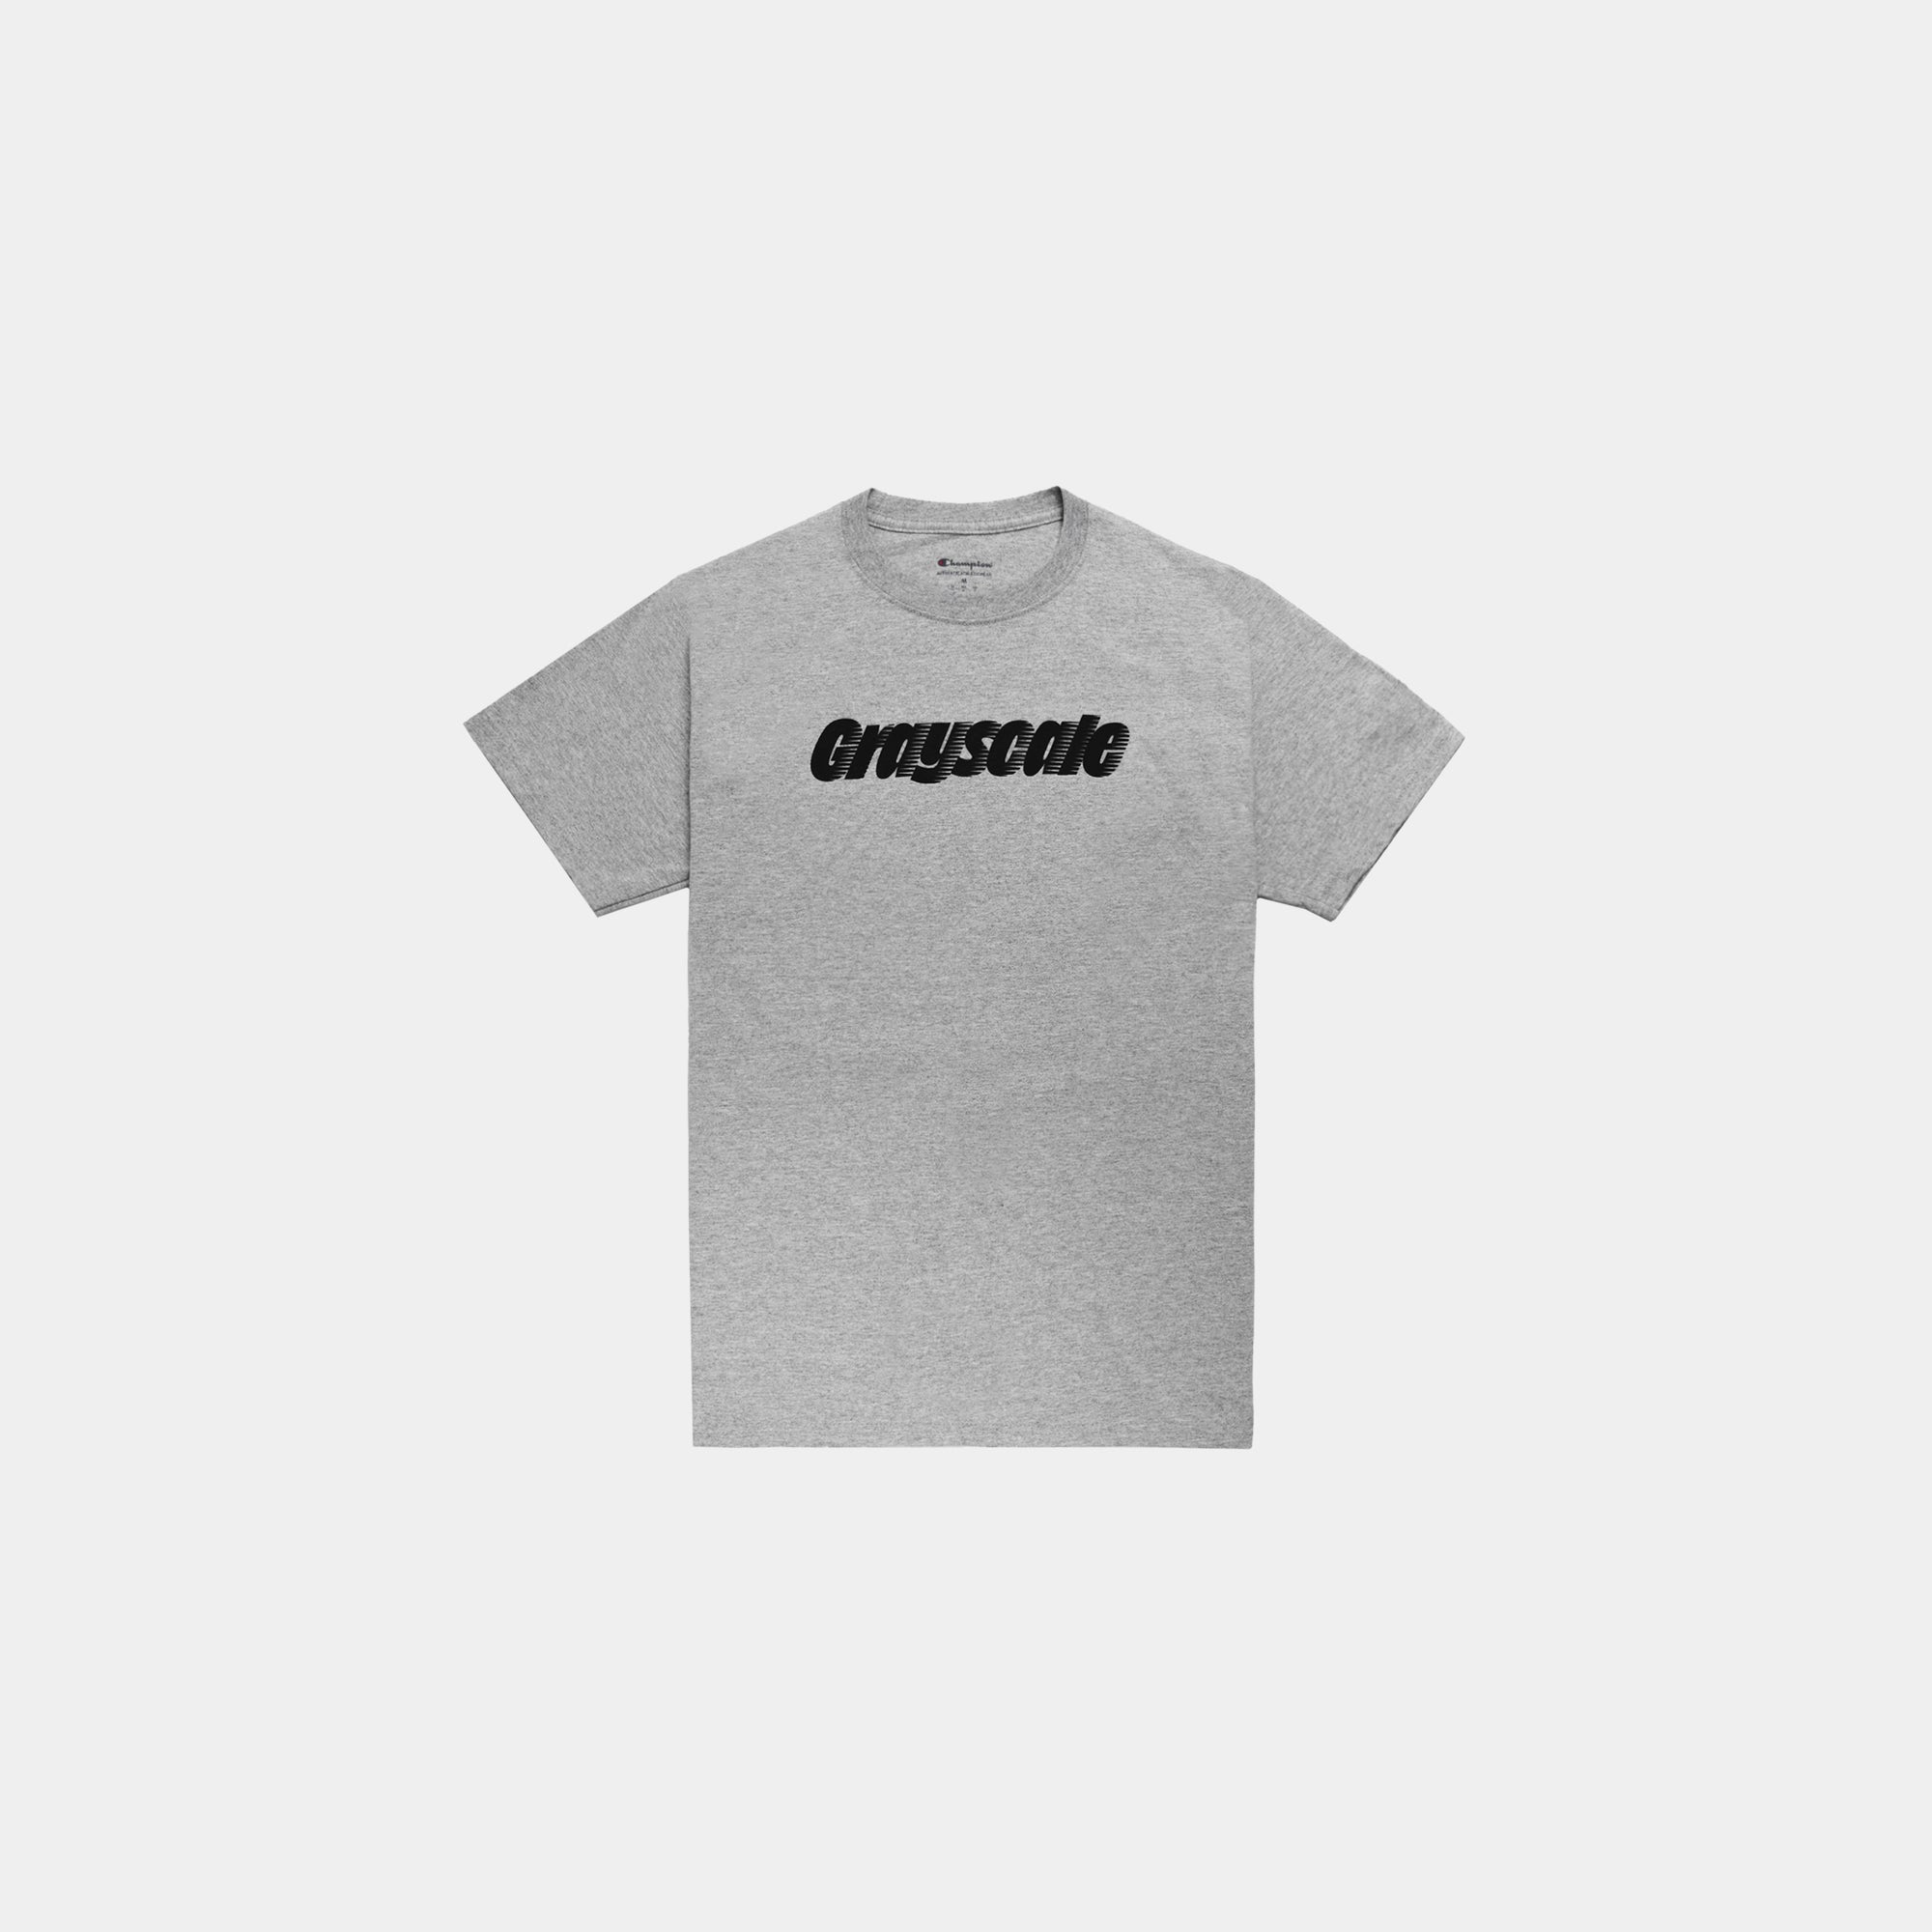 Champion x Grayscale Speed Lines Tee